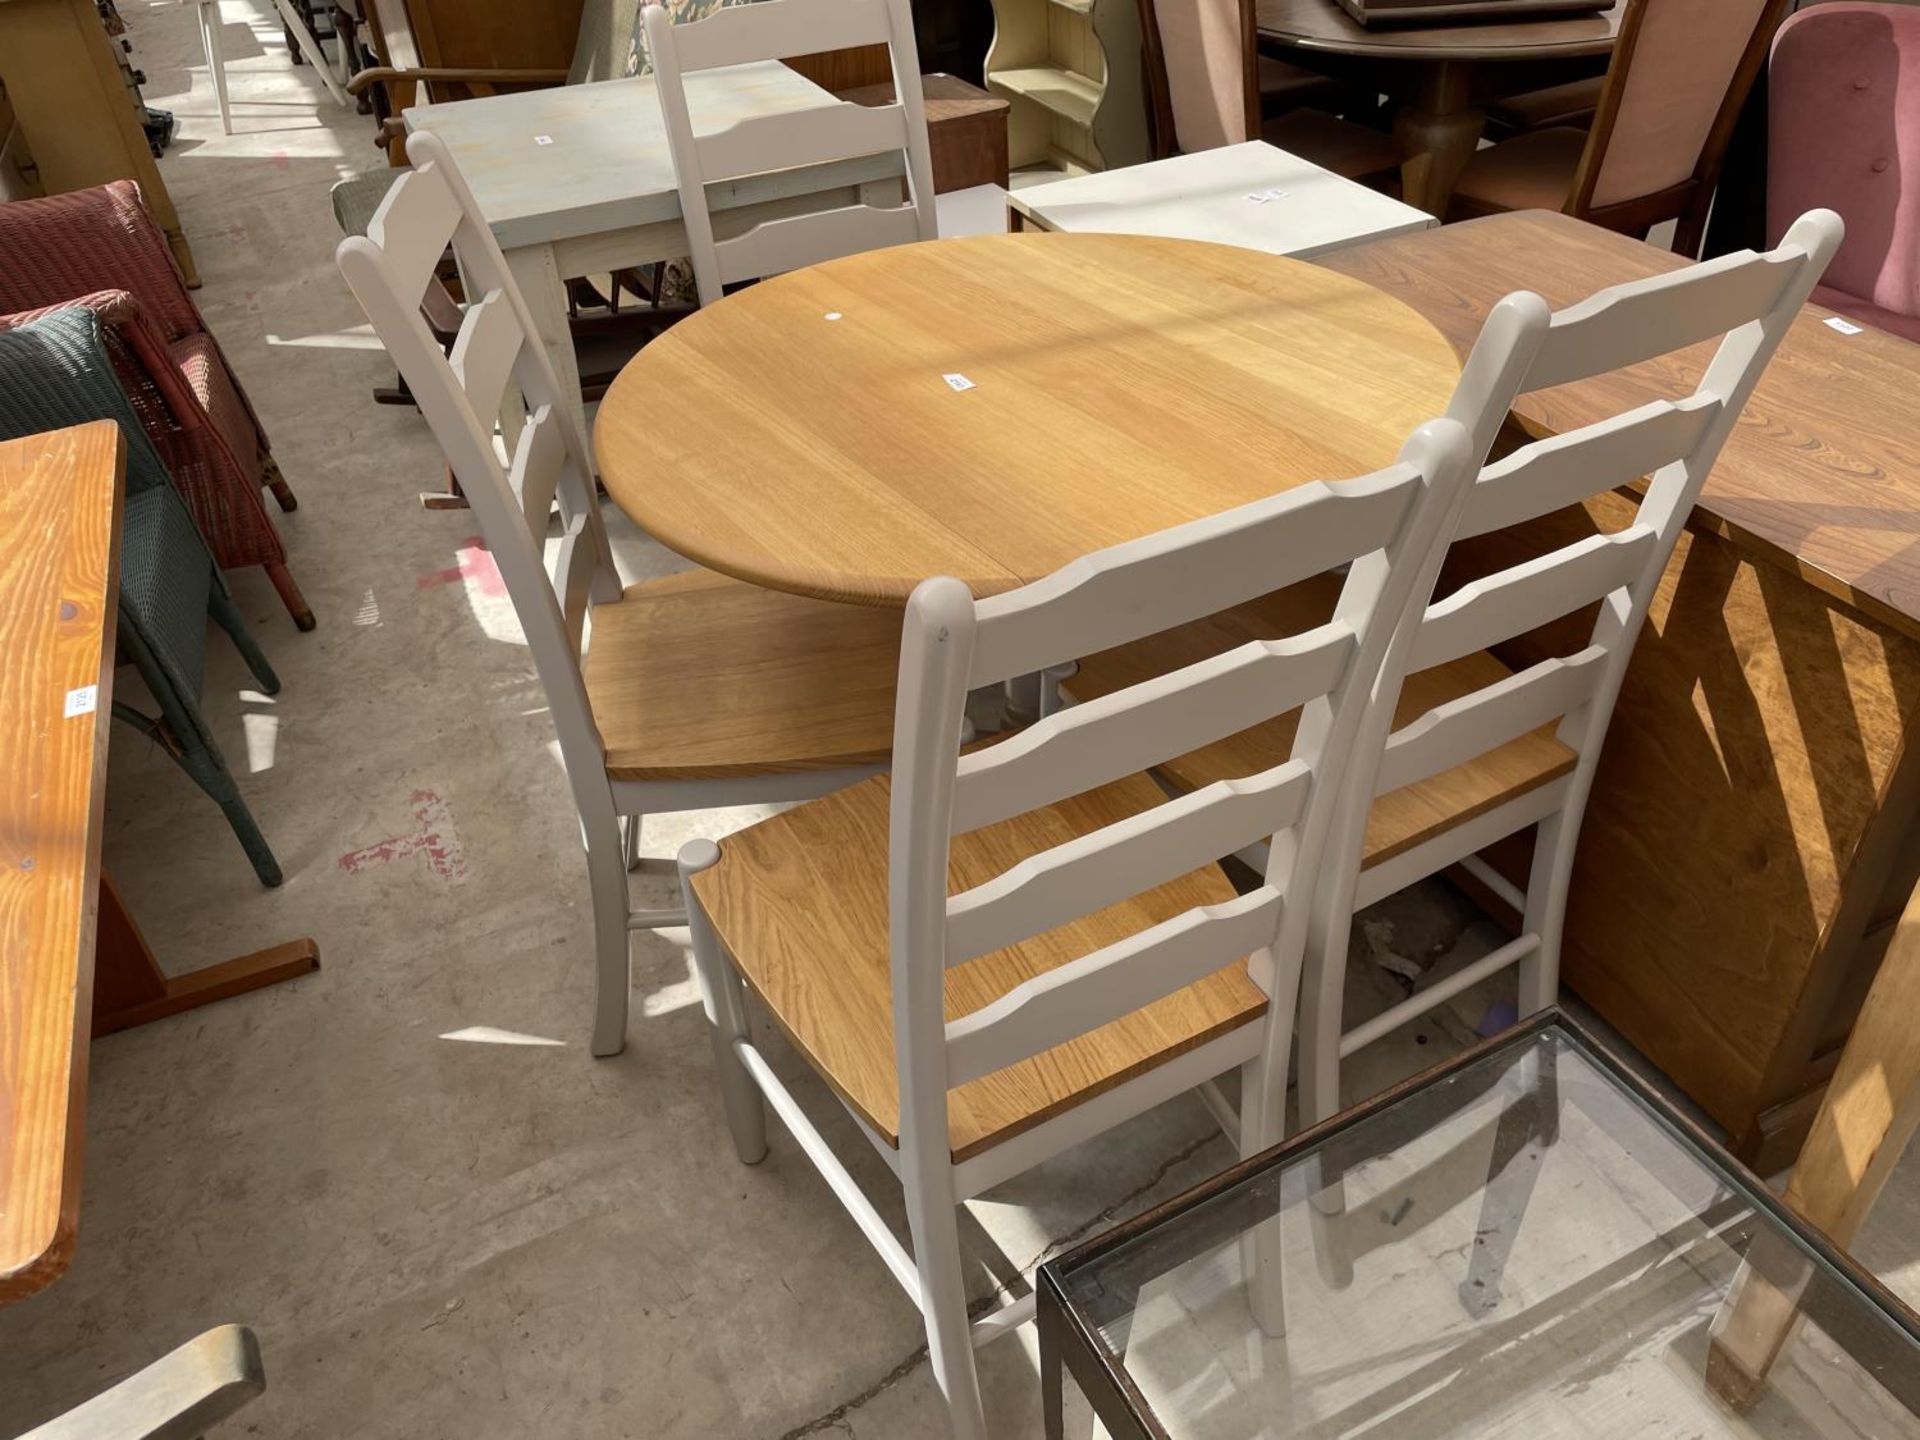 A MODERN CIRCULAR DROP LEAF DINING TABLE, 35" DIAMETER, WITH PAINTED BASE AND FOUR LADDERBACK CHAIRS